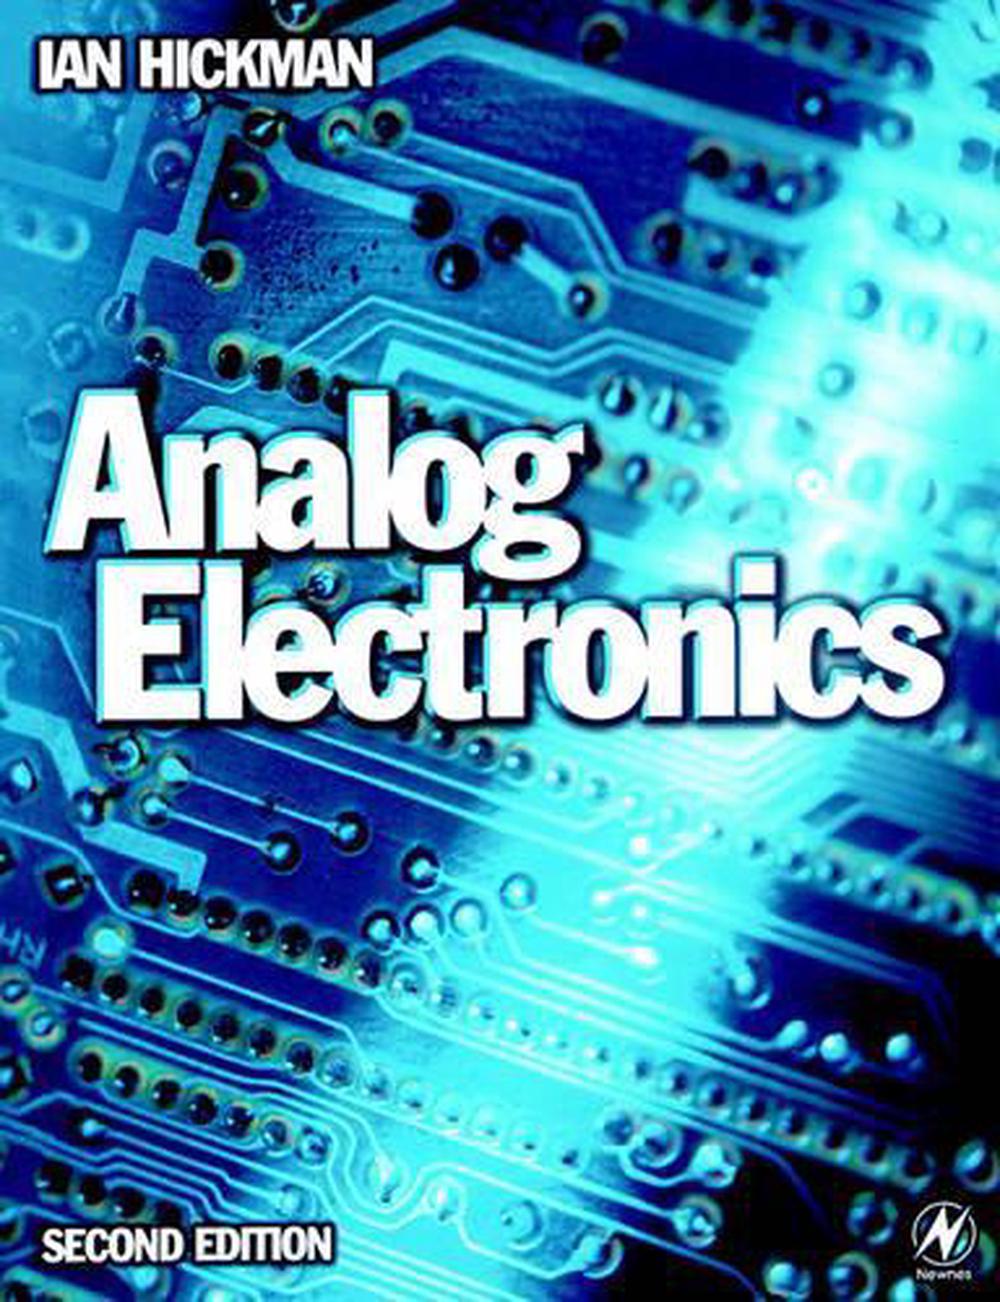 research papers on analog electronics